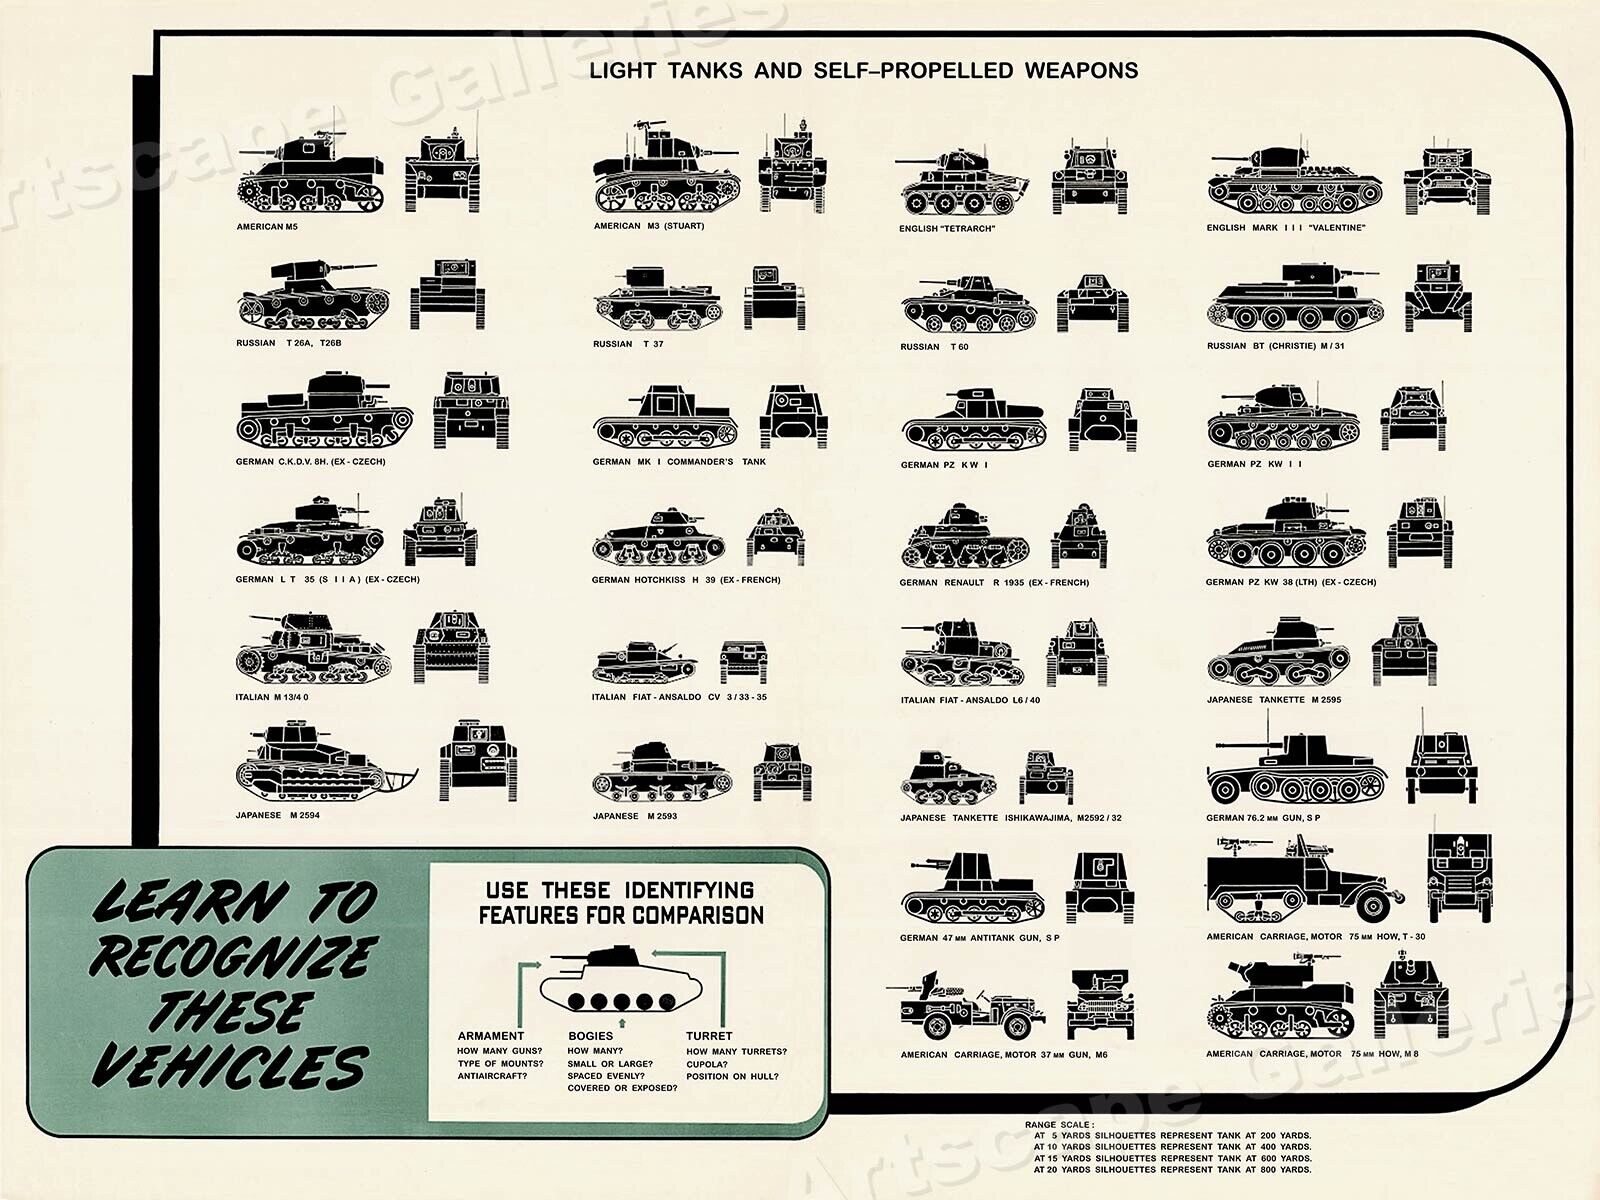 World War 2 - Recognize Light Tanks and Weapons -18x24